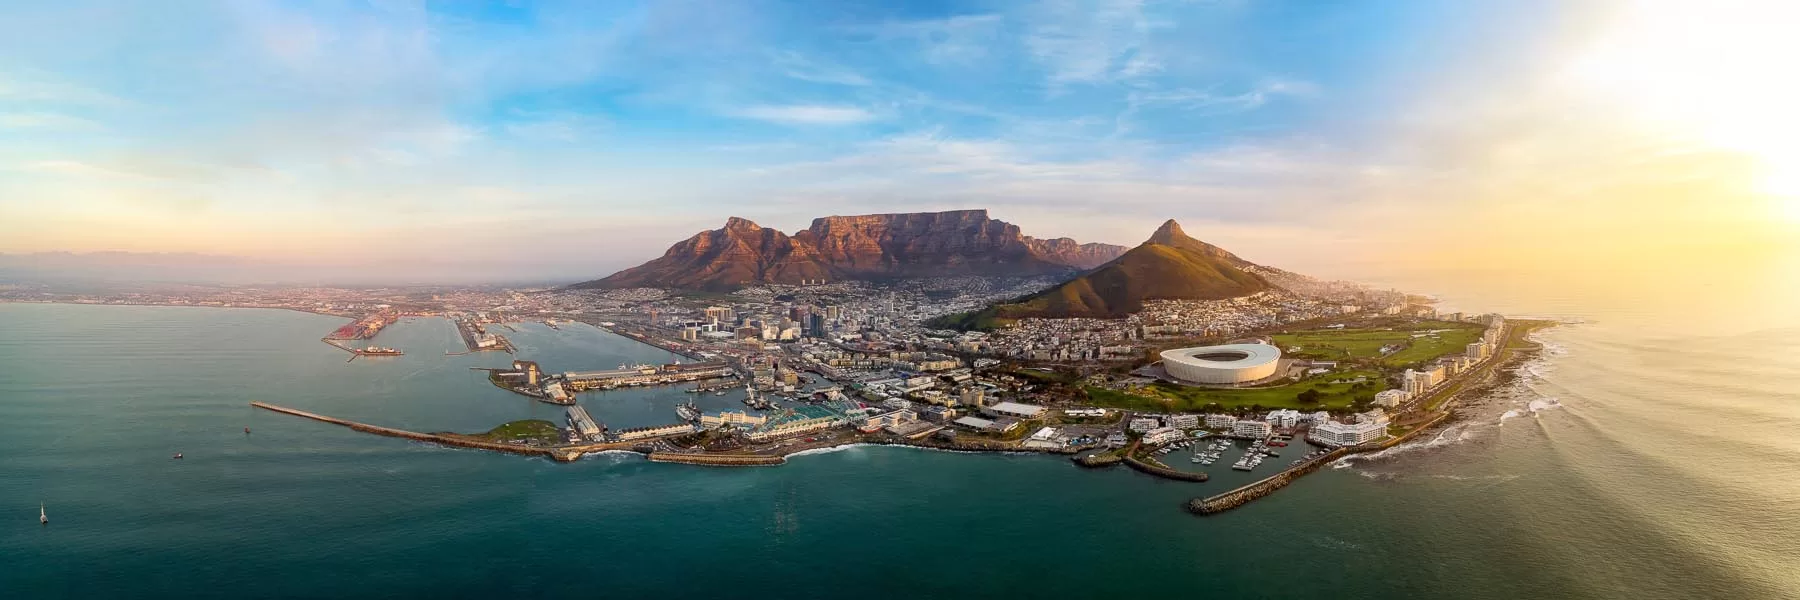 10 must visit places in South Africa